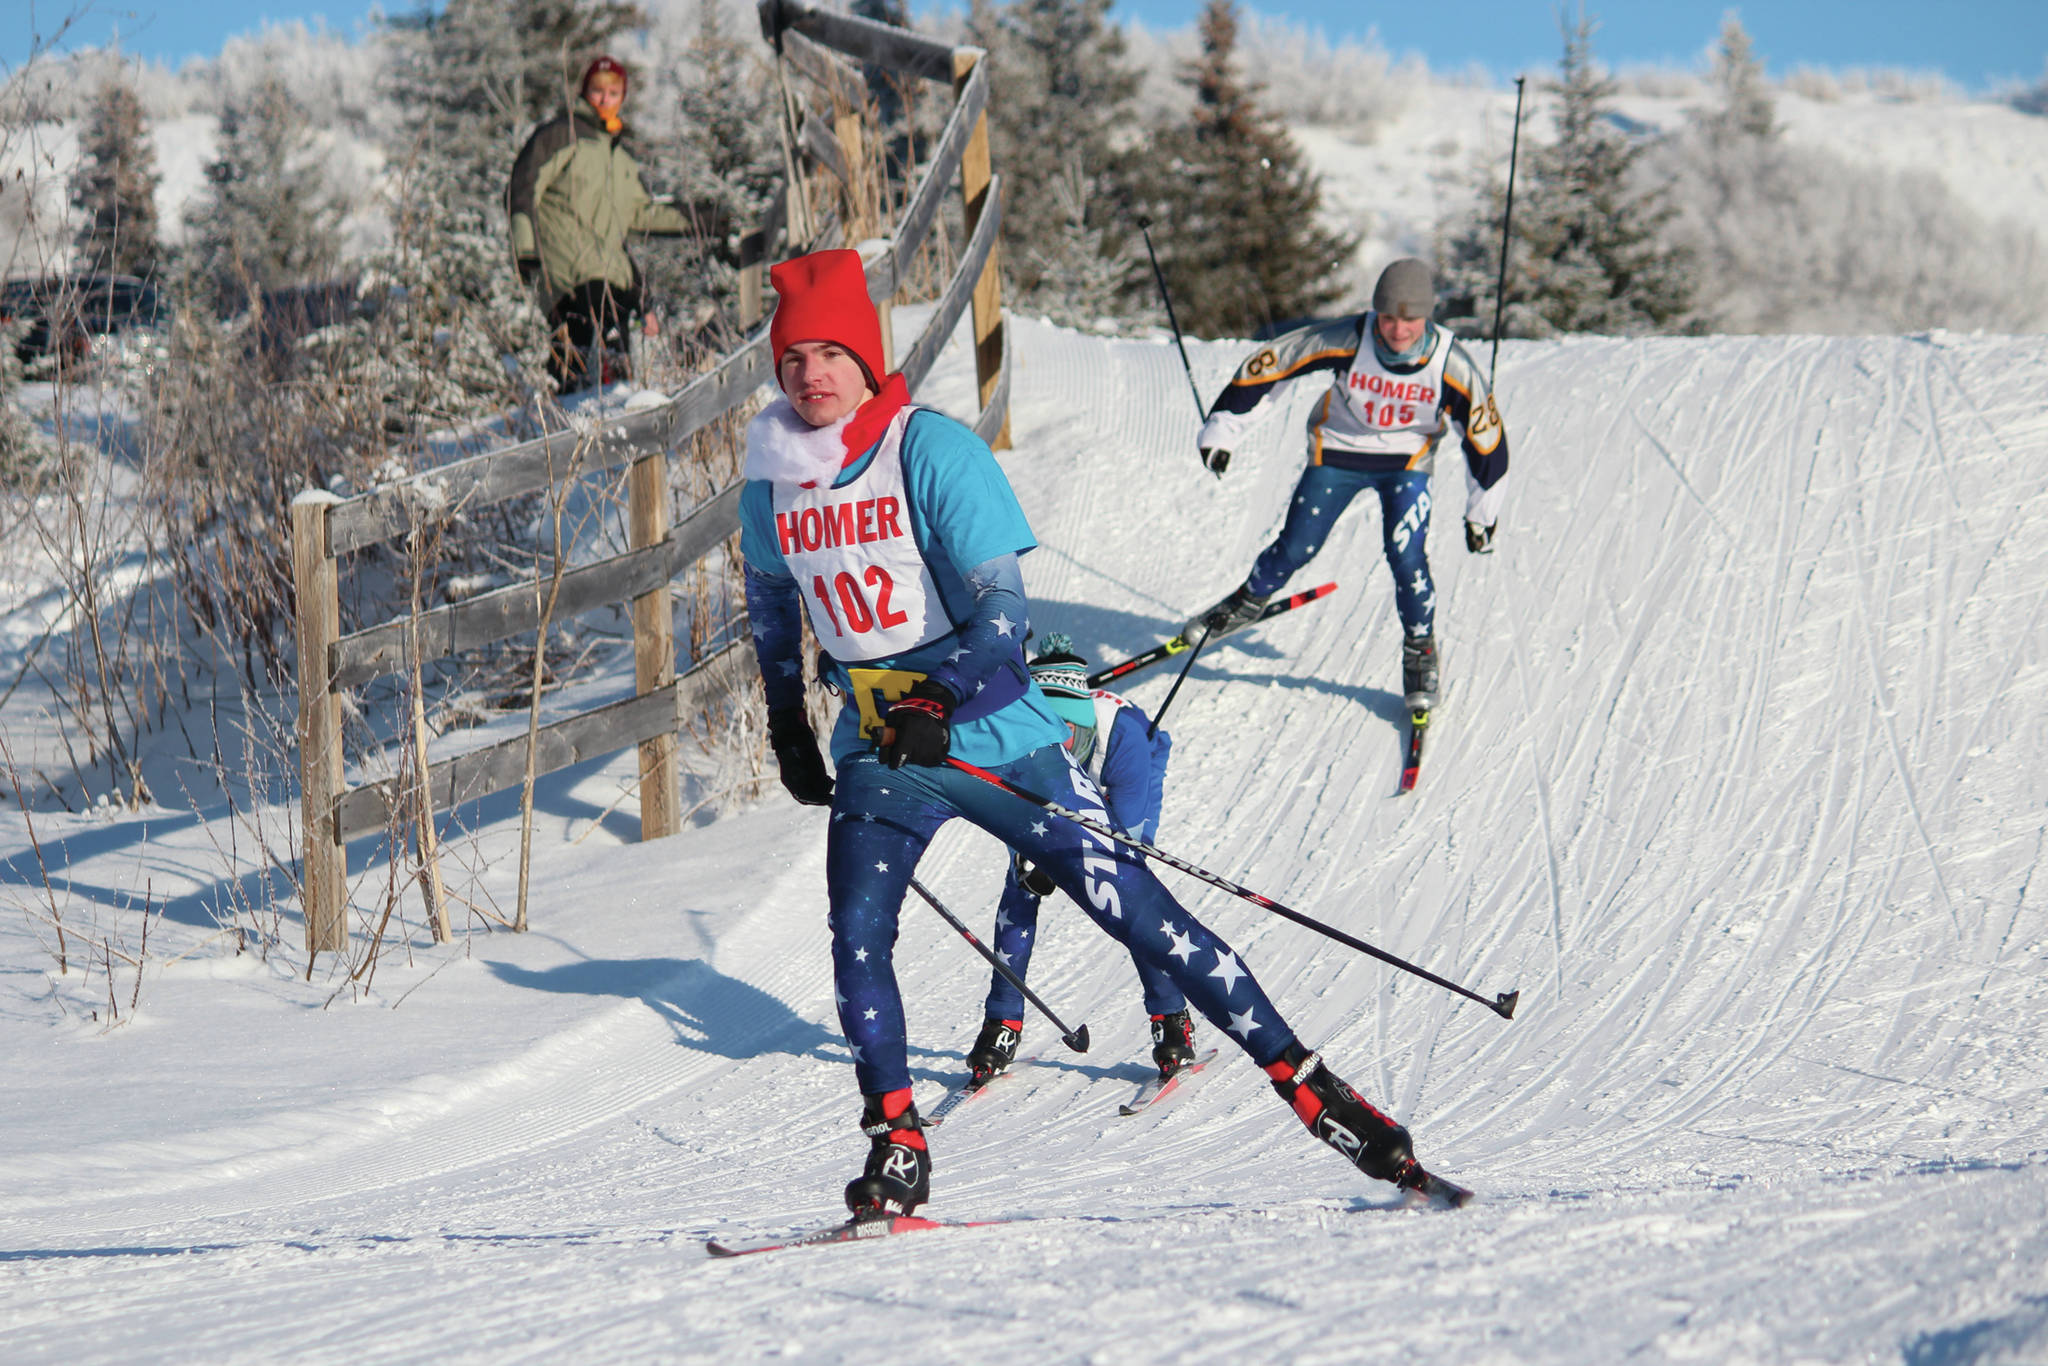 Soldotna’s Jack Harris leads a group of skiers down a hill during the boys’ varsity 5-kilometer skate race Saturday, Feb. 1, 2020 during the Homer Invite at the Lookout Mountain Trails on Ohlson Mountain Road near Homer, Alaska. (Photo by Megan Pacer/Homer News)